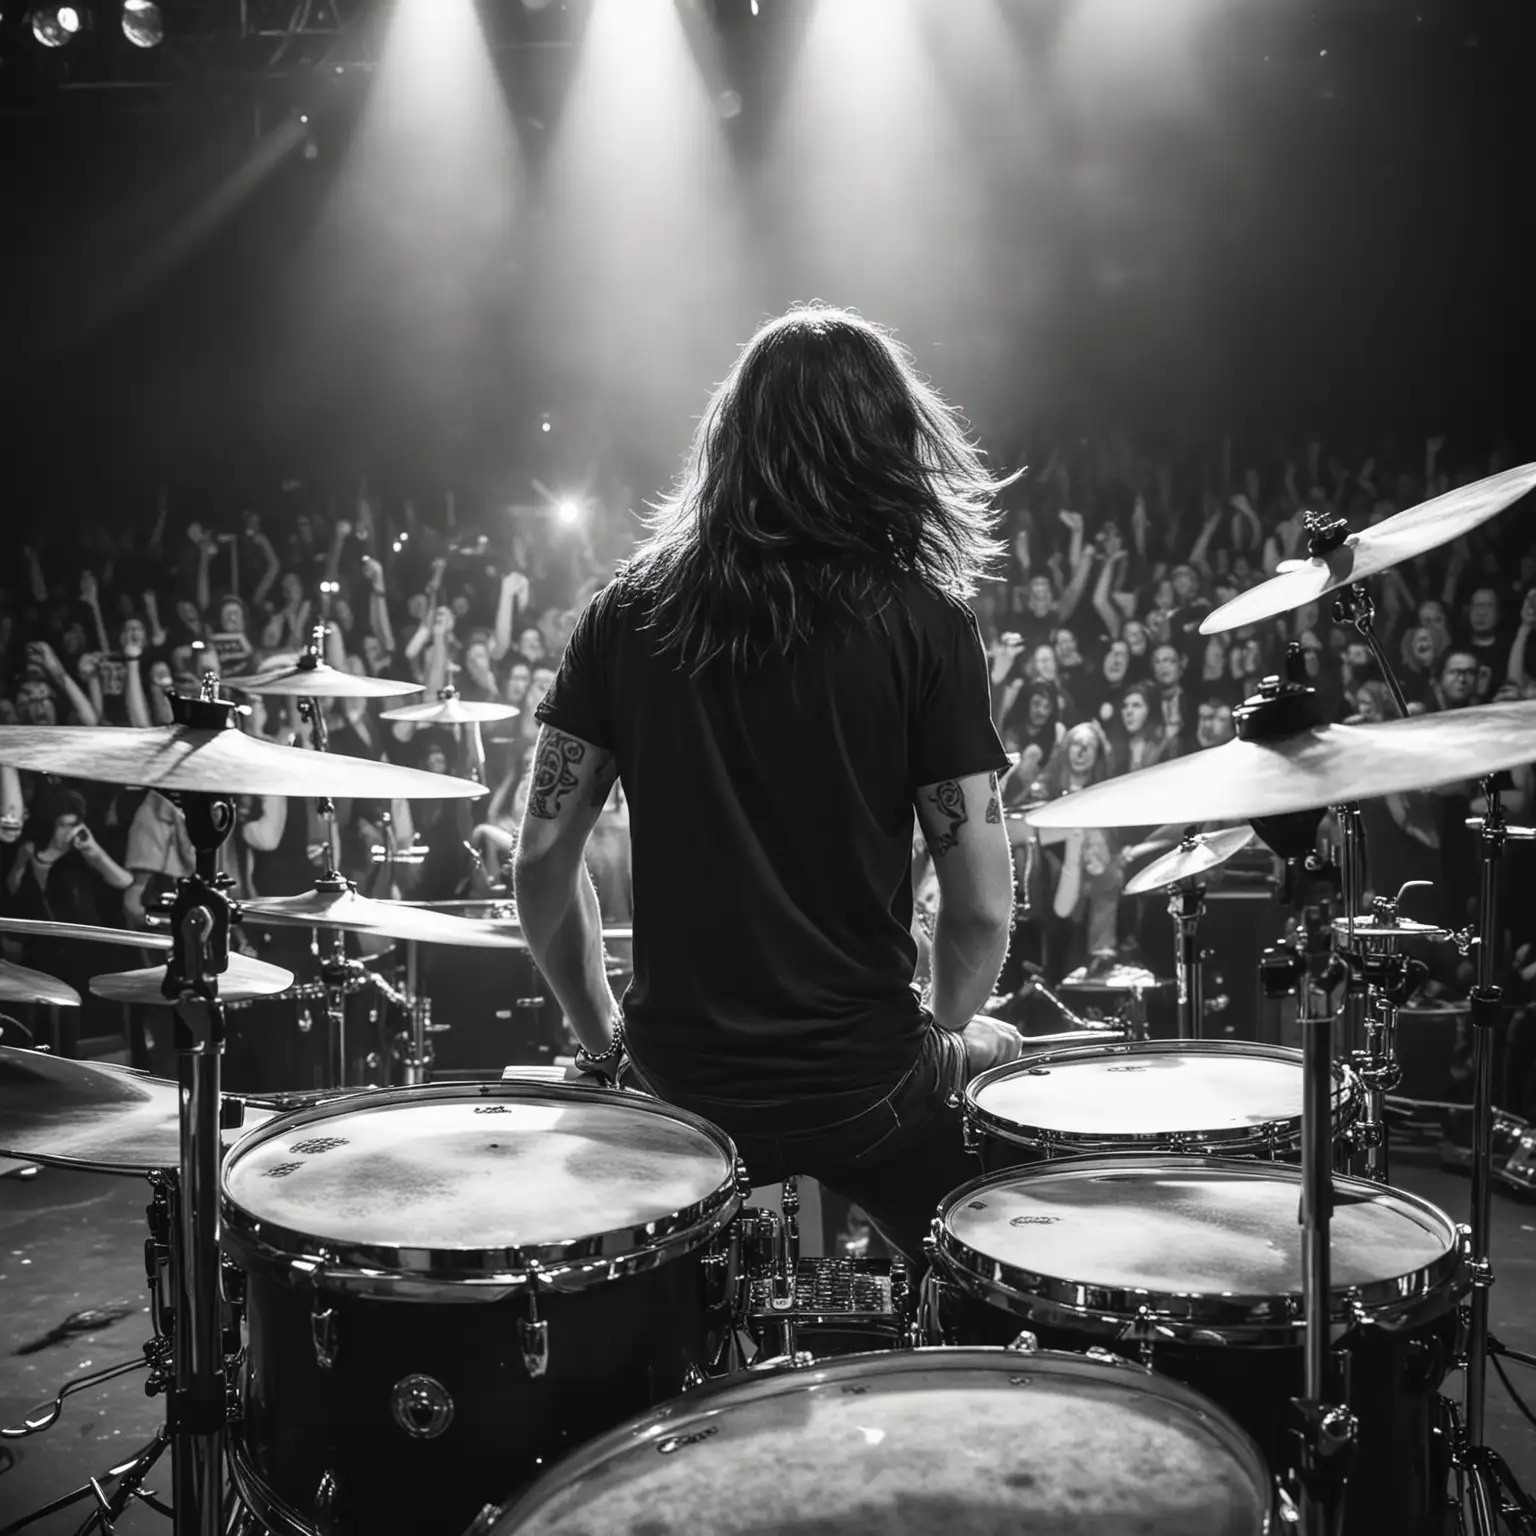 Grunge Rock Drummer Performing on Stage in Vintage Black and White Photograph